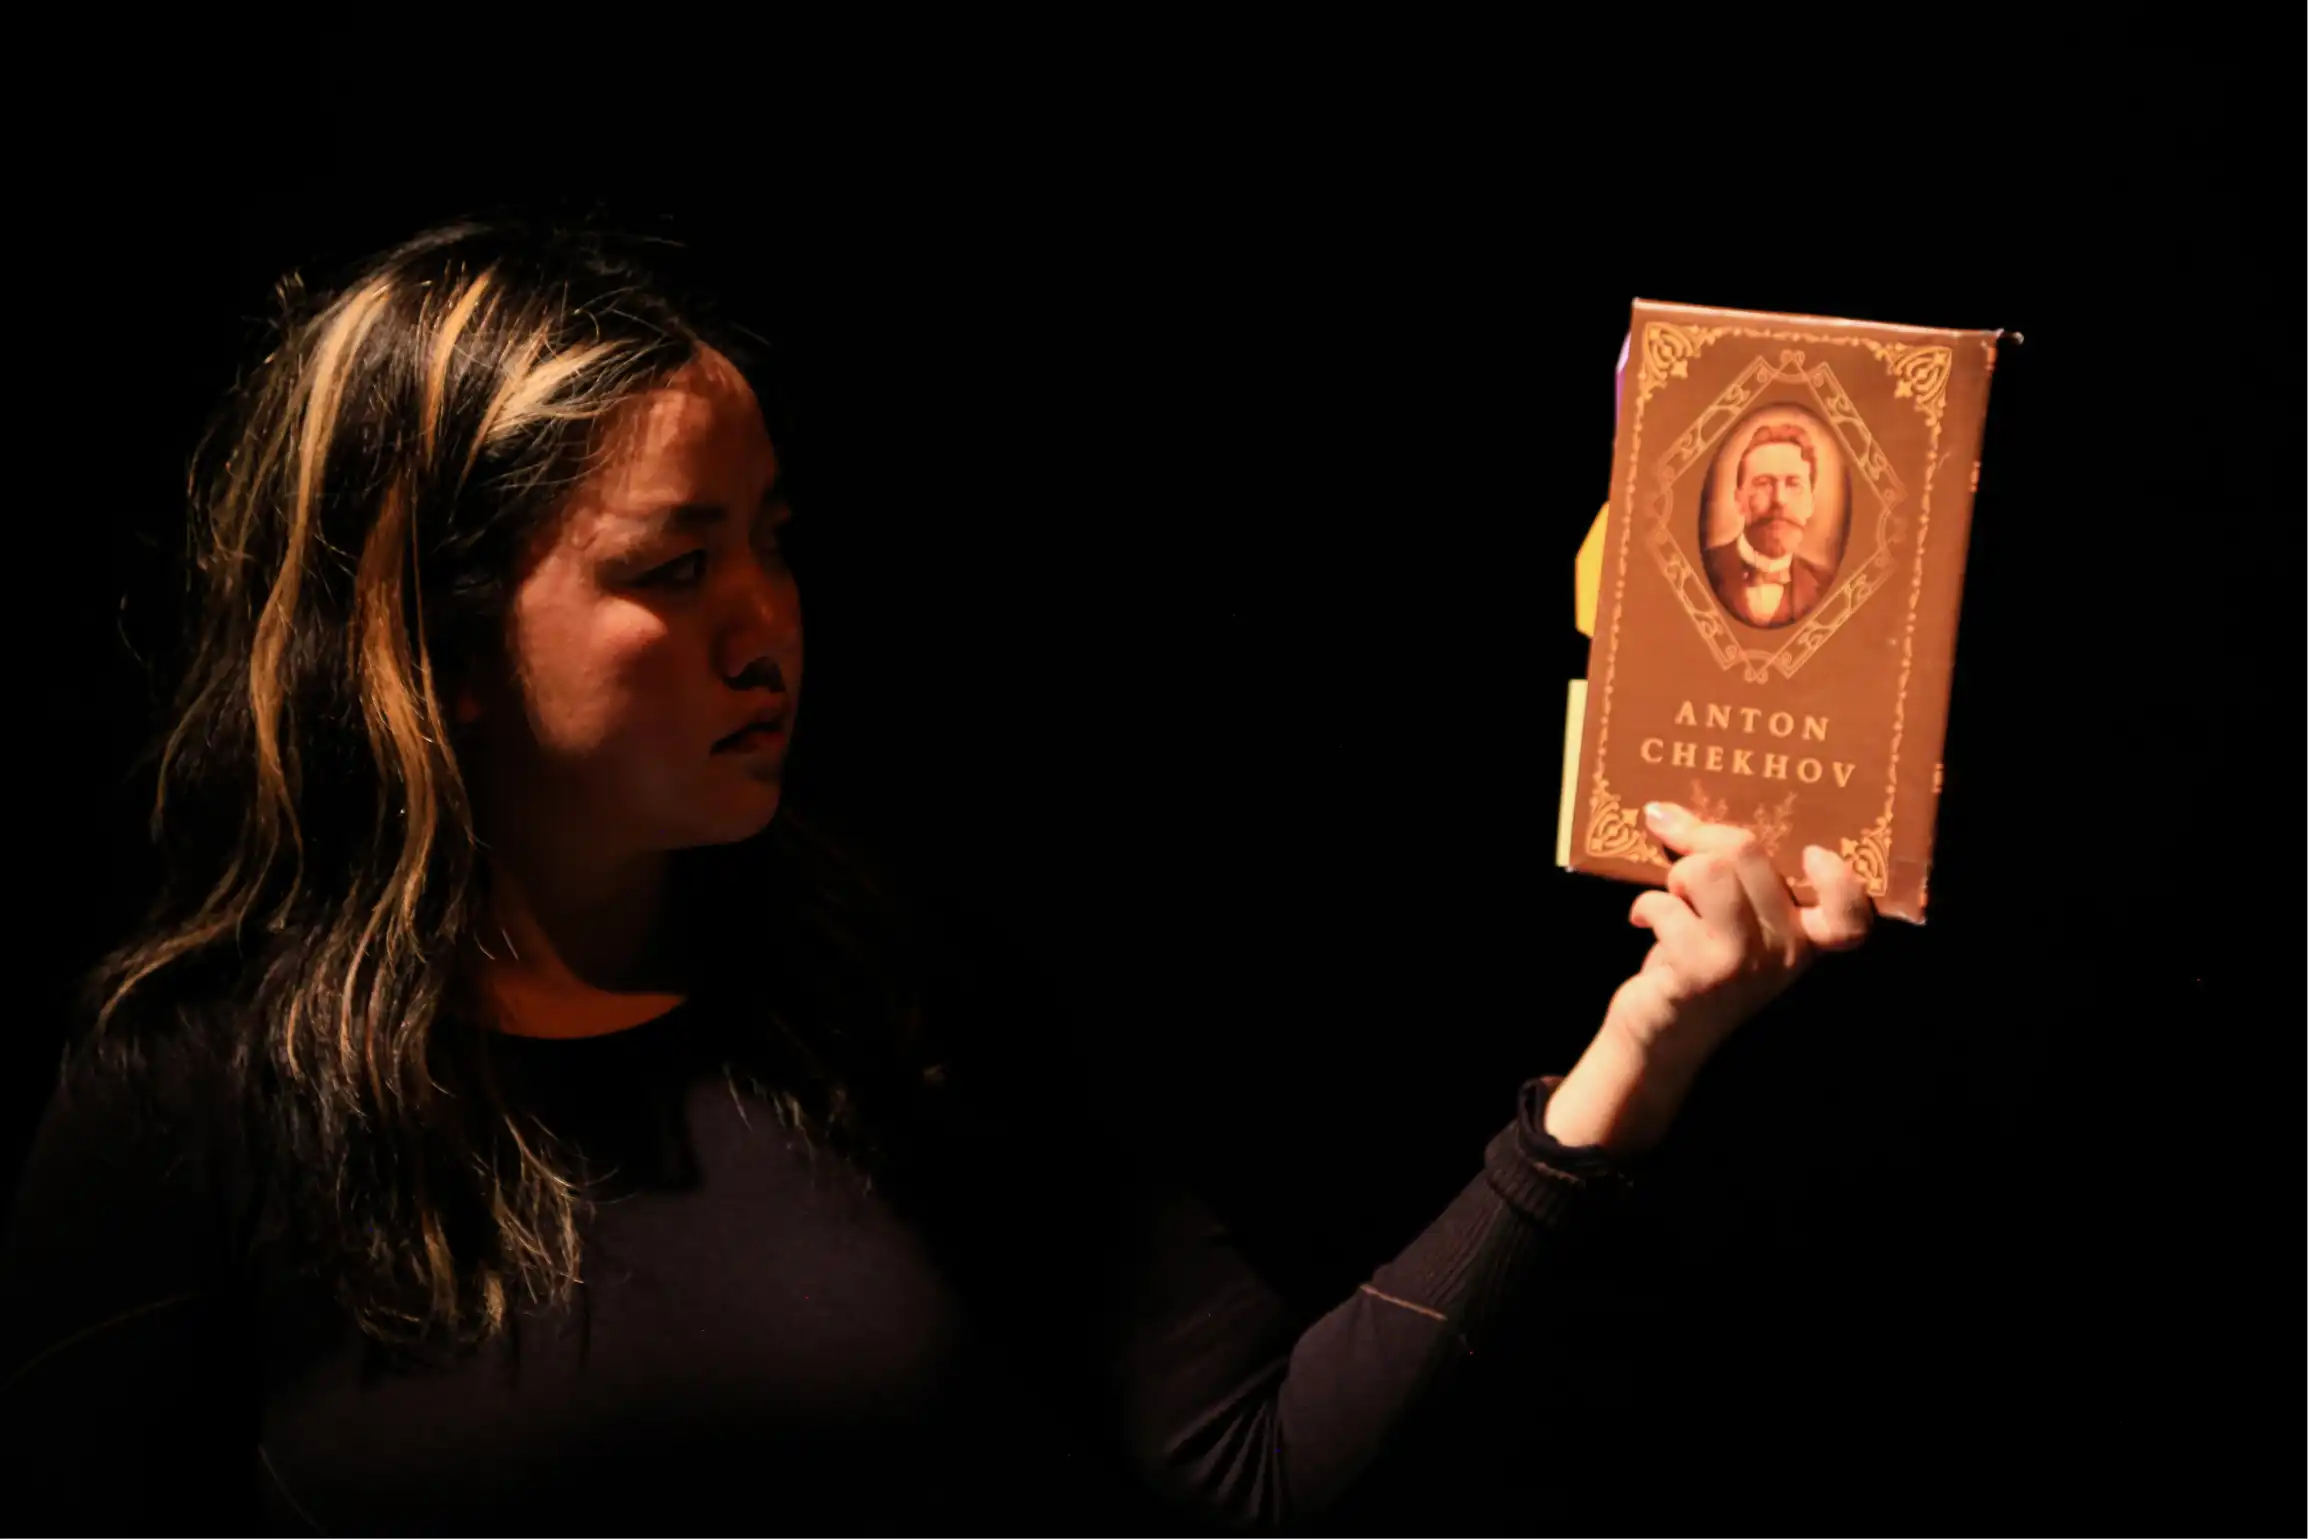 Ariel holds a printed copy of Anton Chekhov's 'The Cherry Orchard' under bright lights against a black background